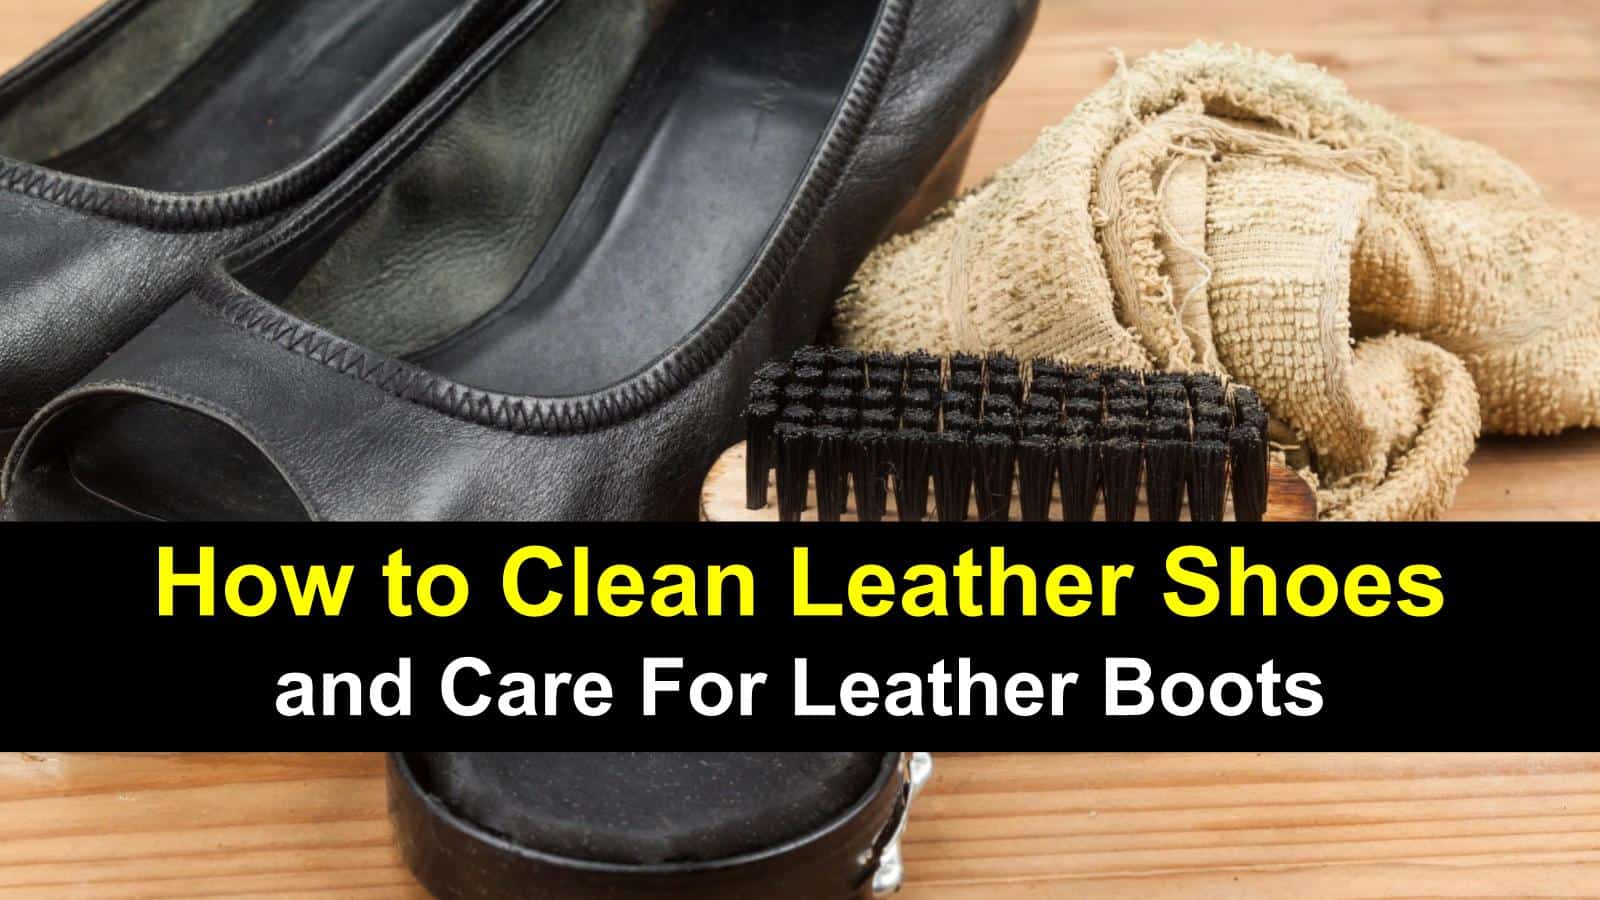 cleaning leather boots with vinegar